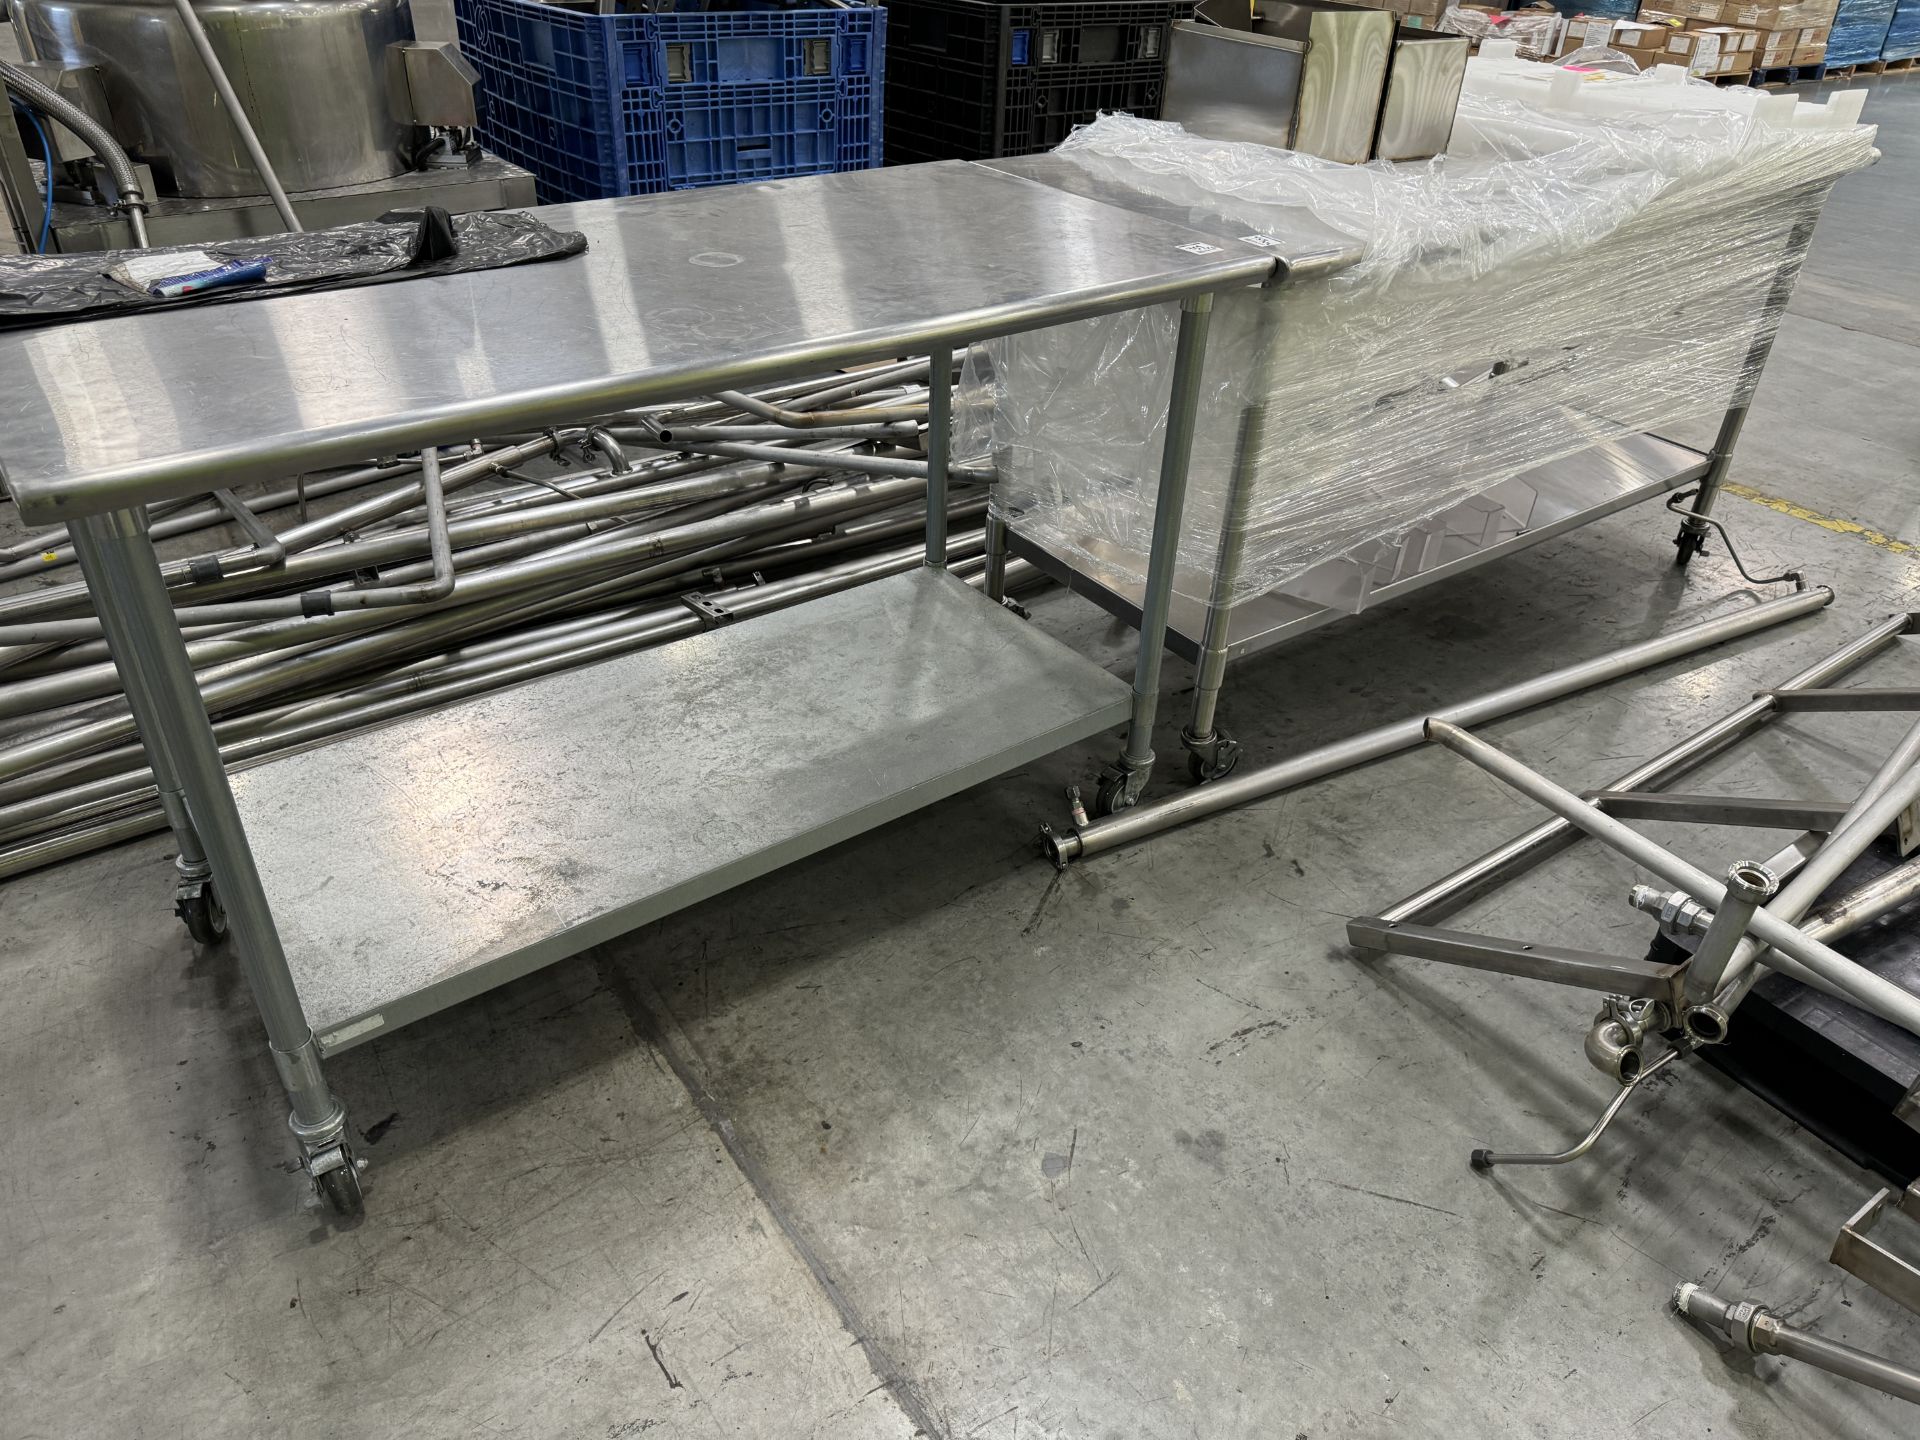 (2) Stainless Steel Lab Benches on casters